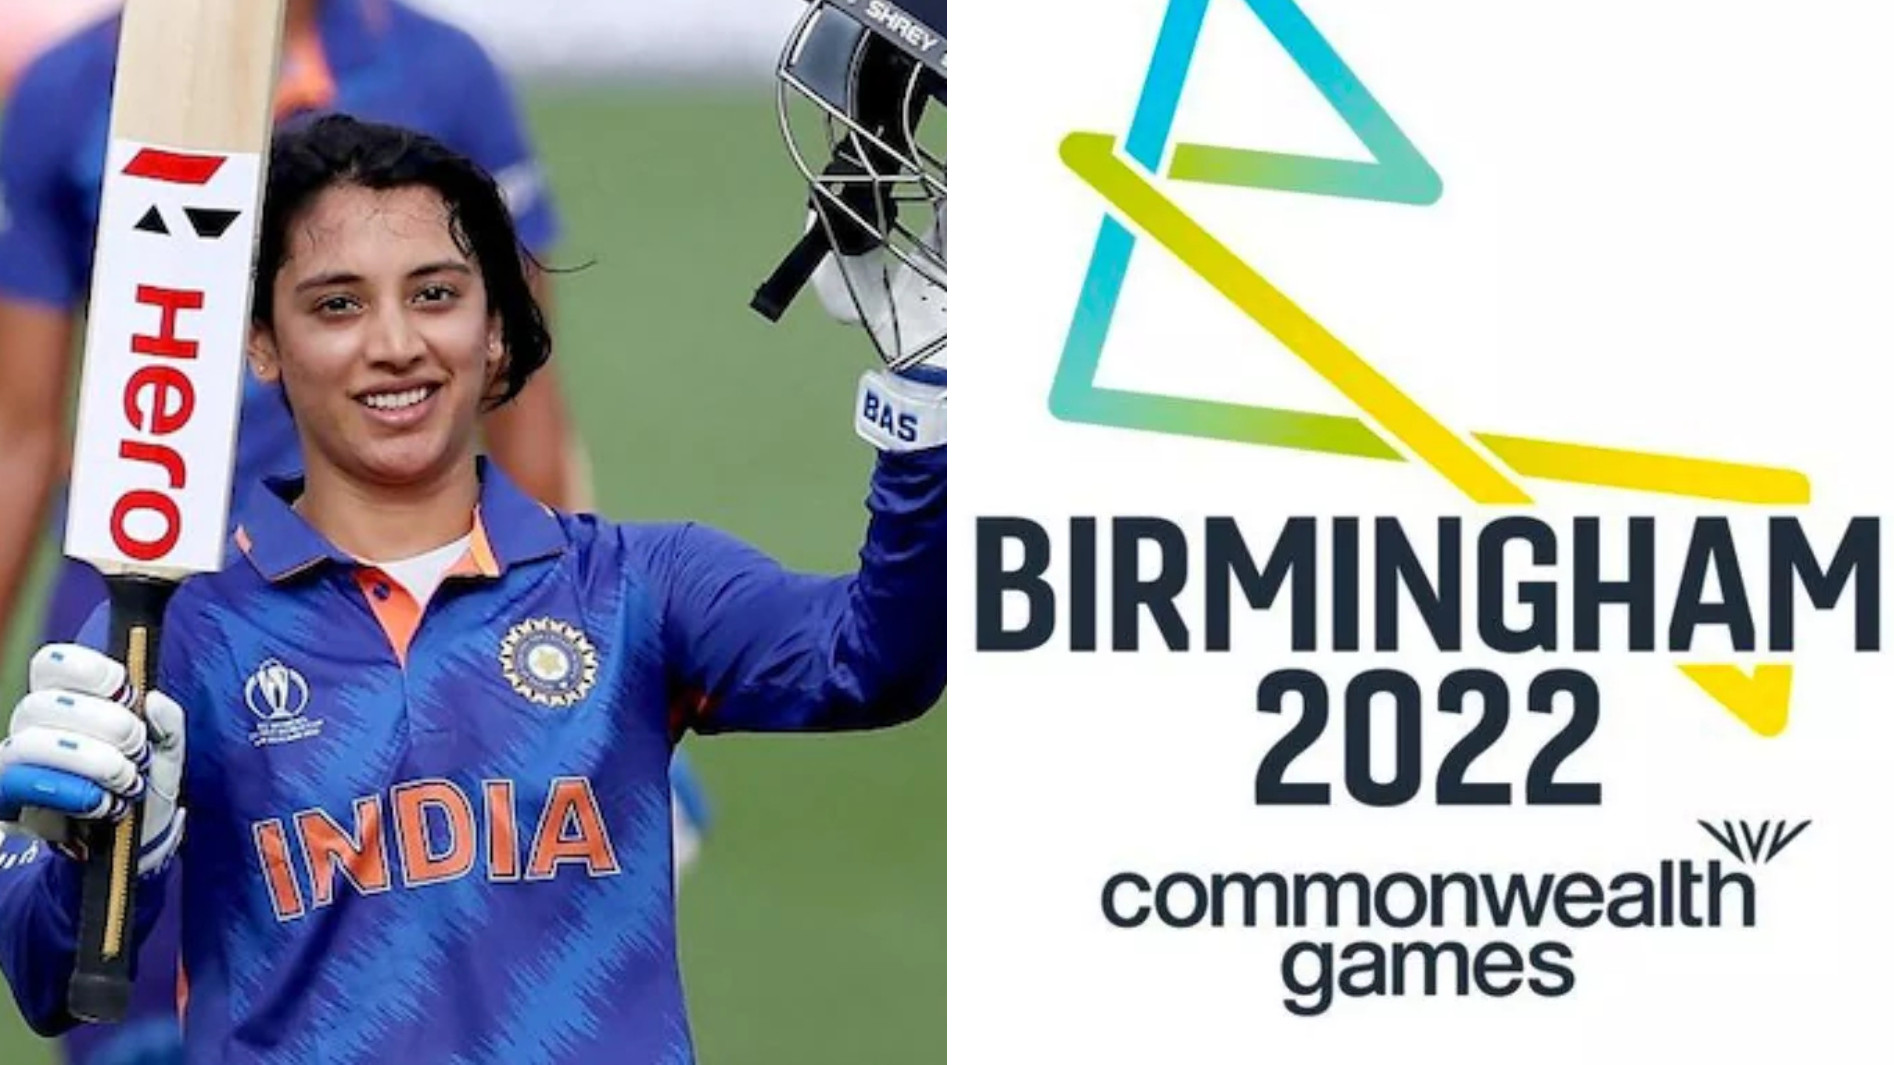 We are aiming for Gold medal at Birmingham Commonwealth Games 2022- Smriti Mandhana